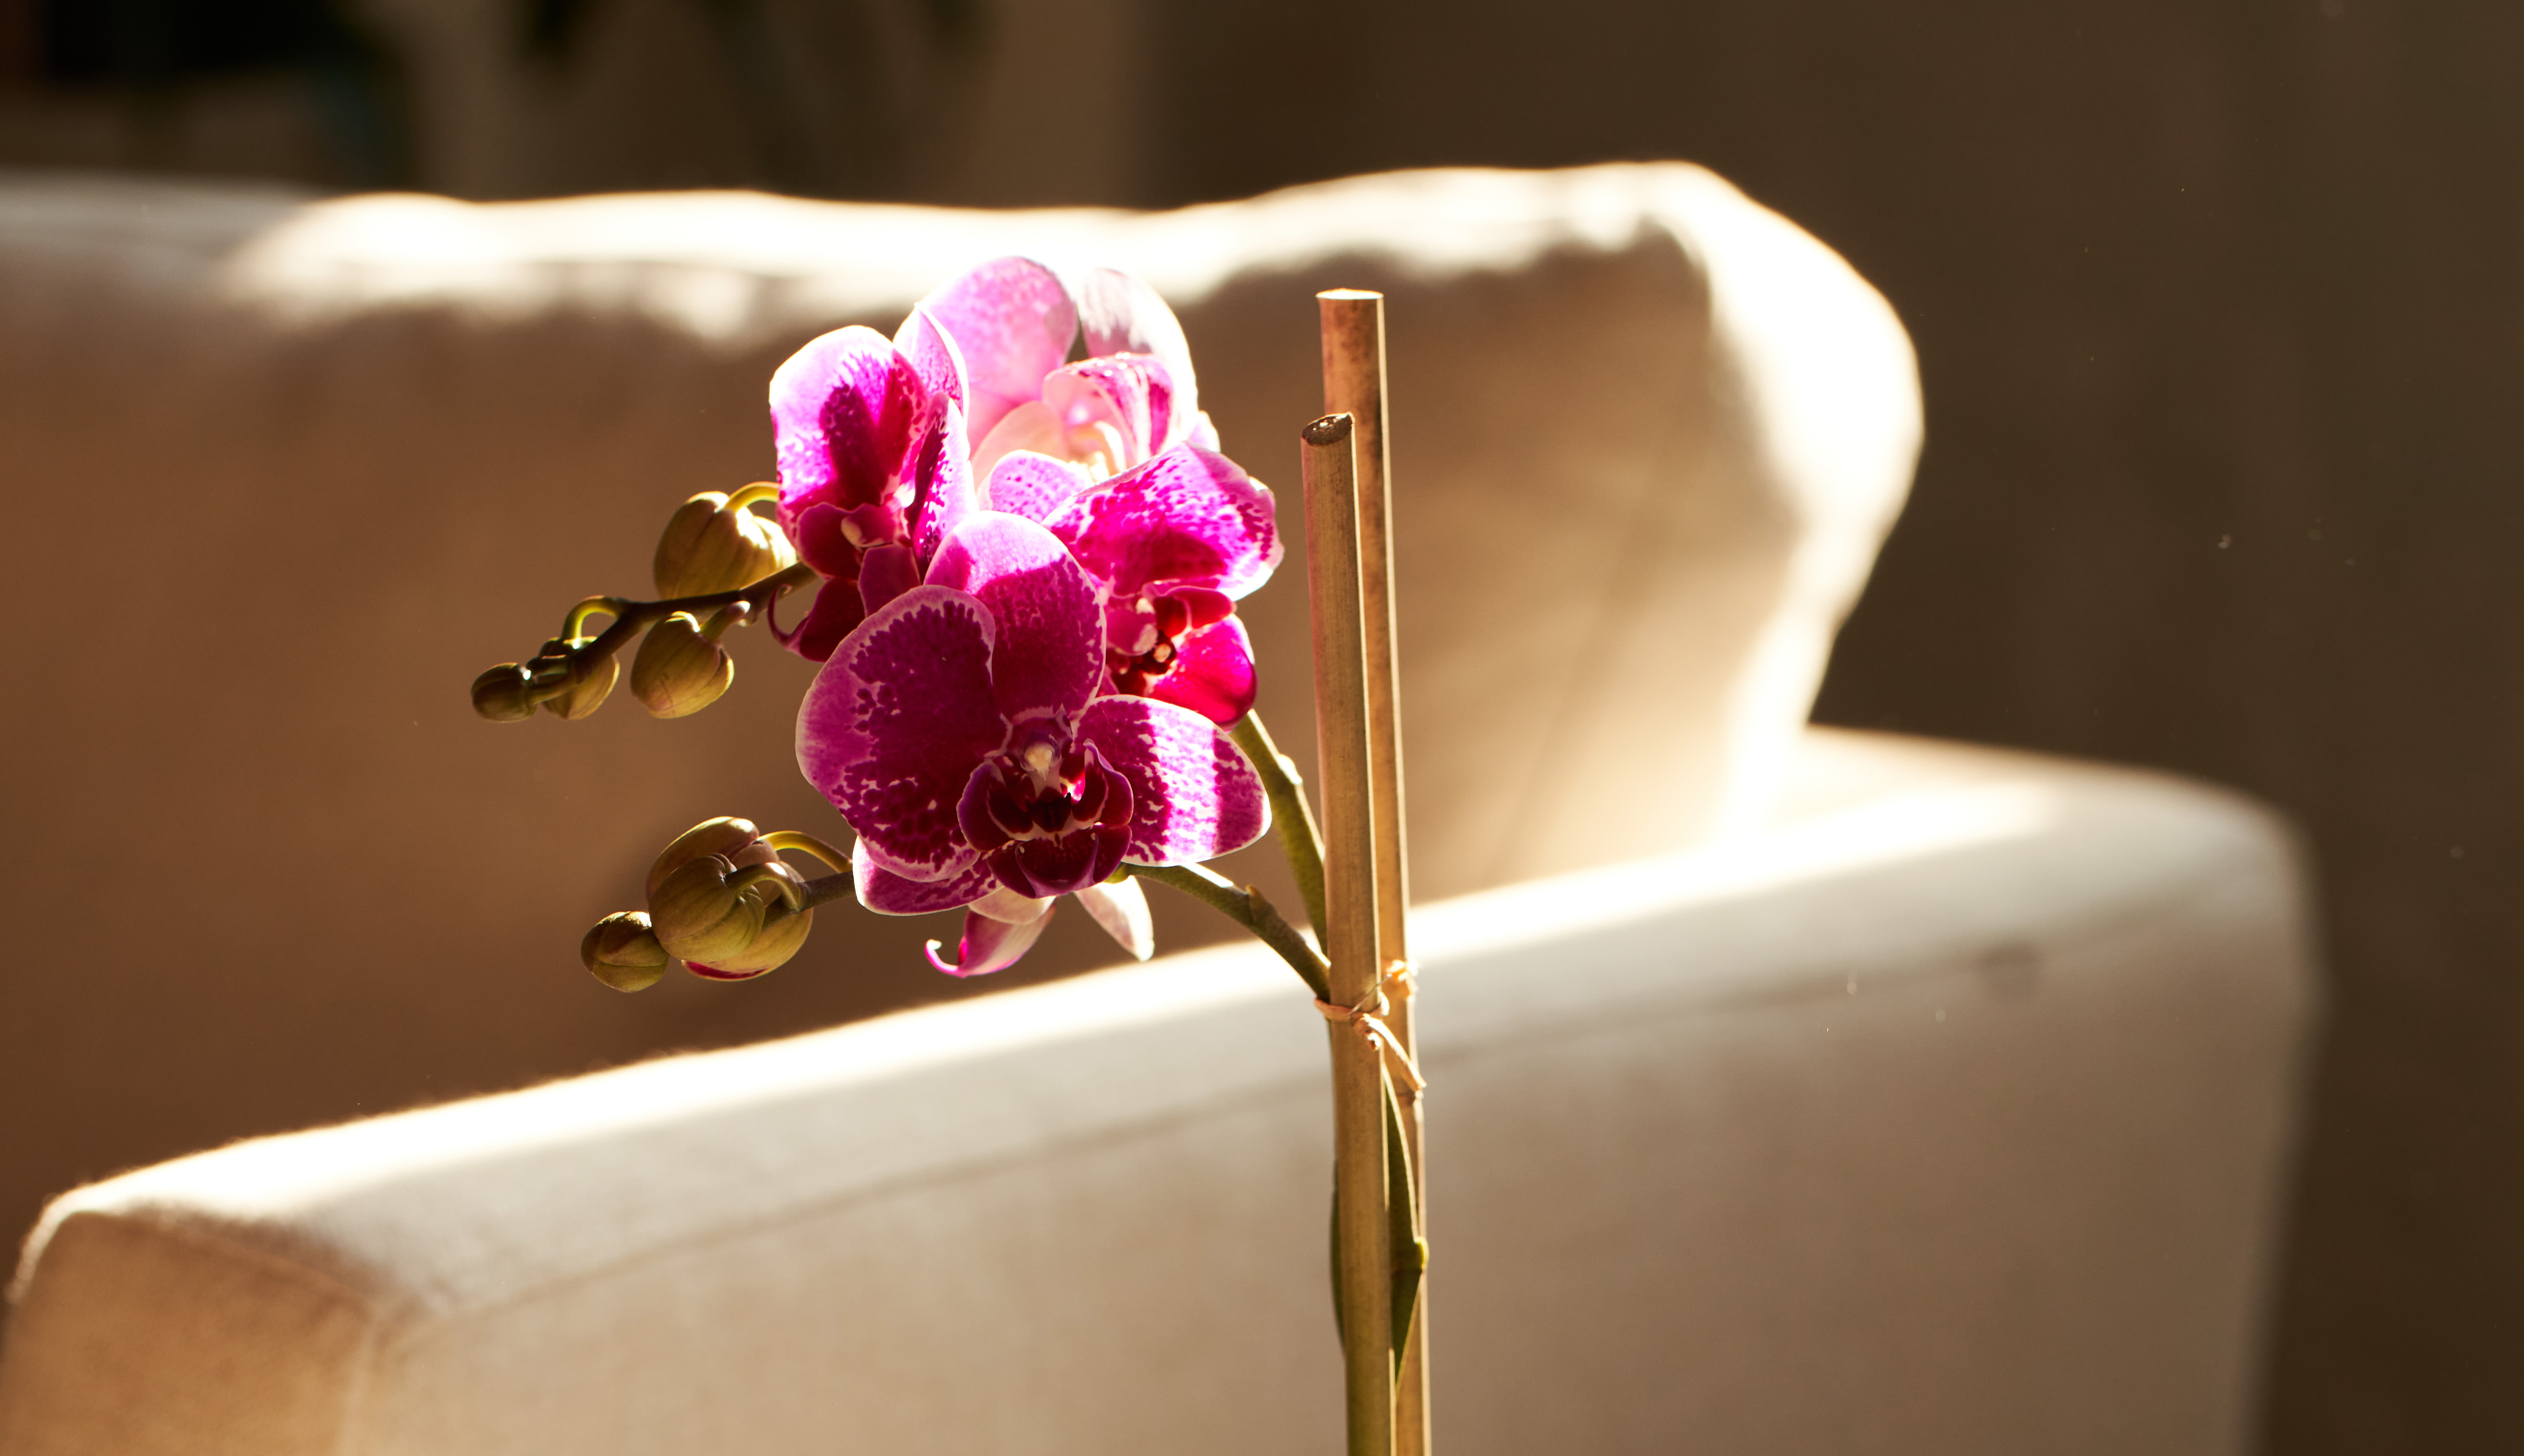 Close up image of a purple orchid plant.